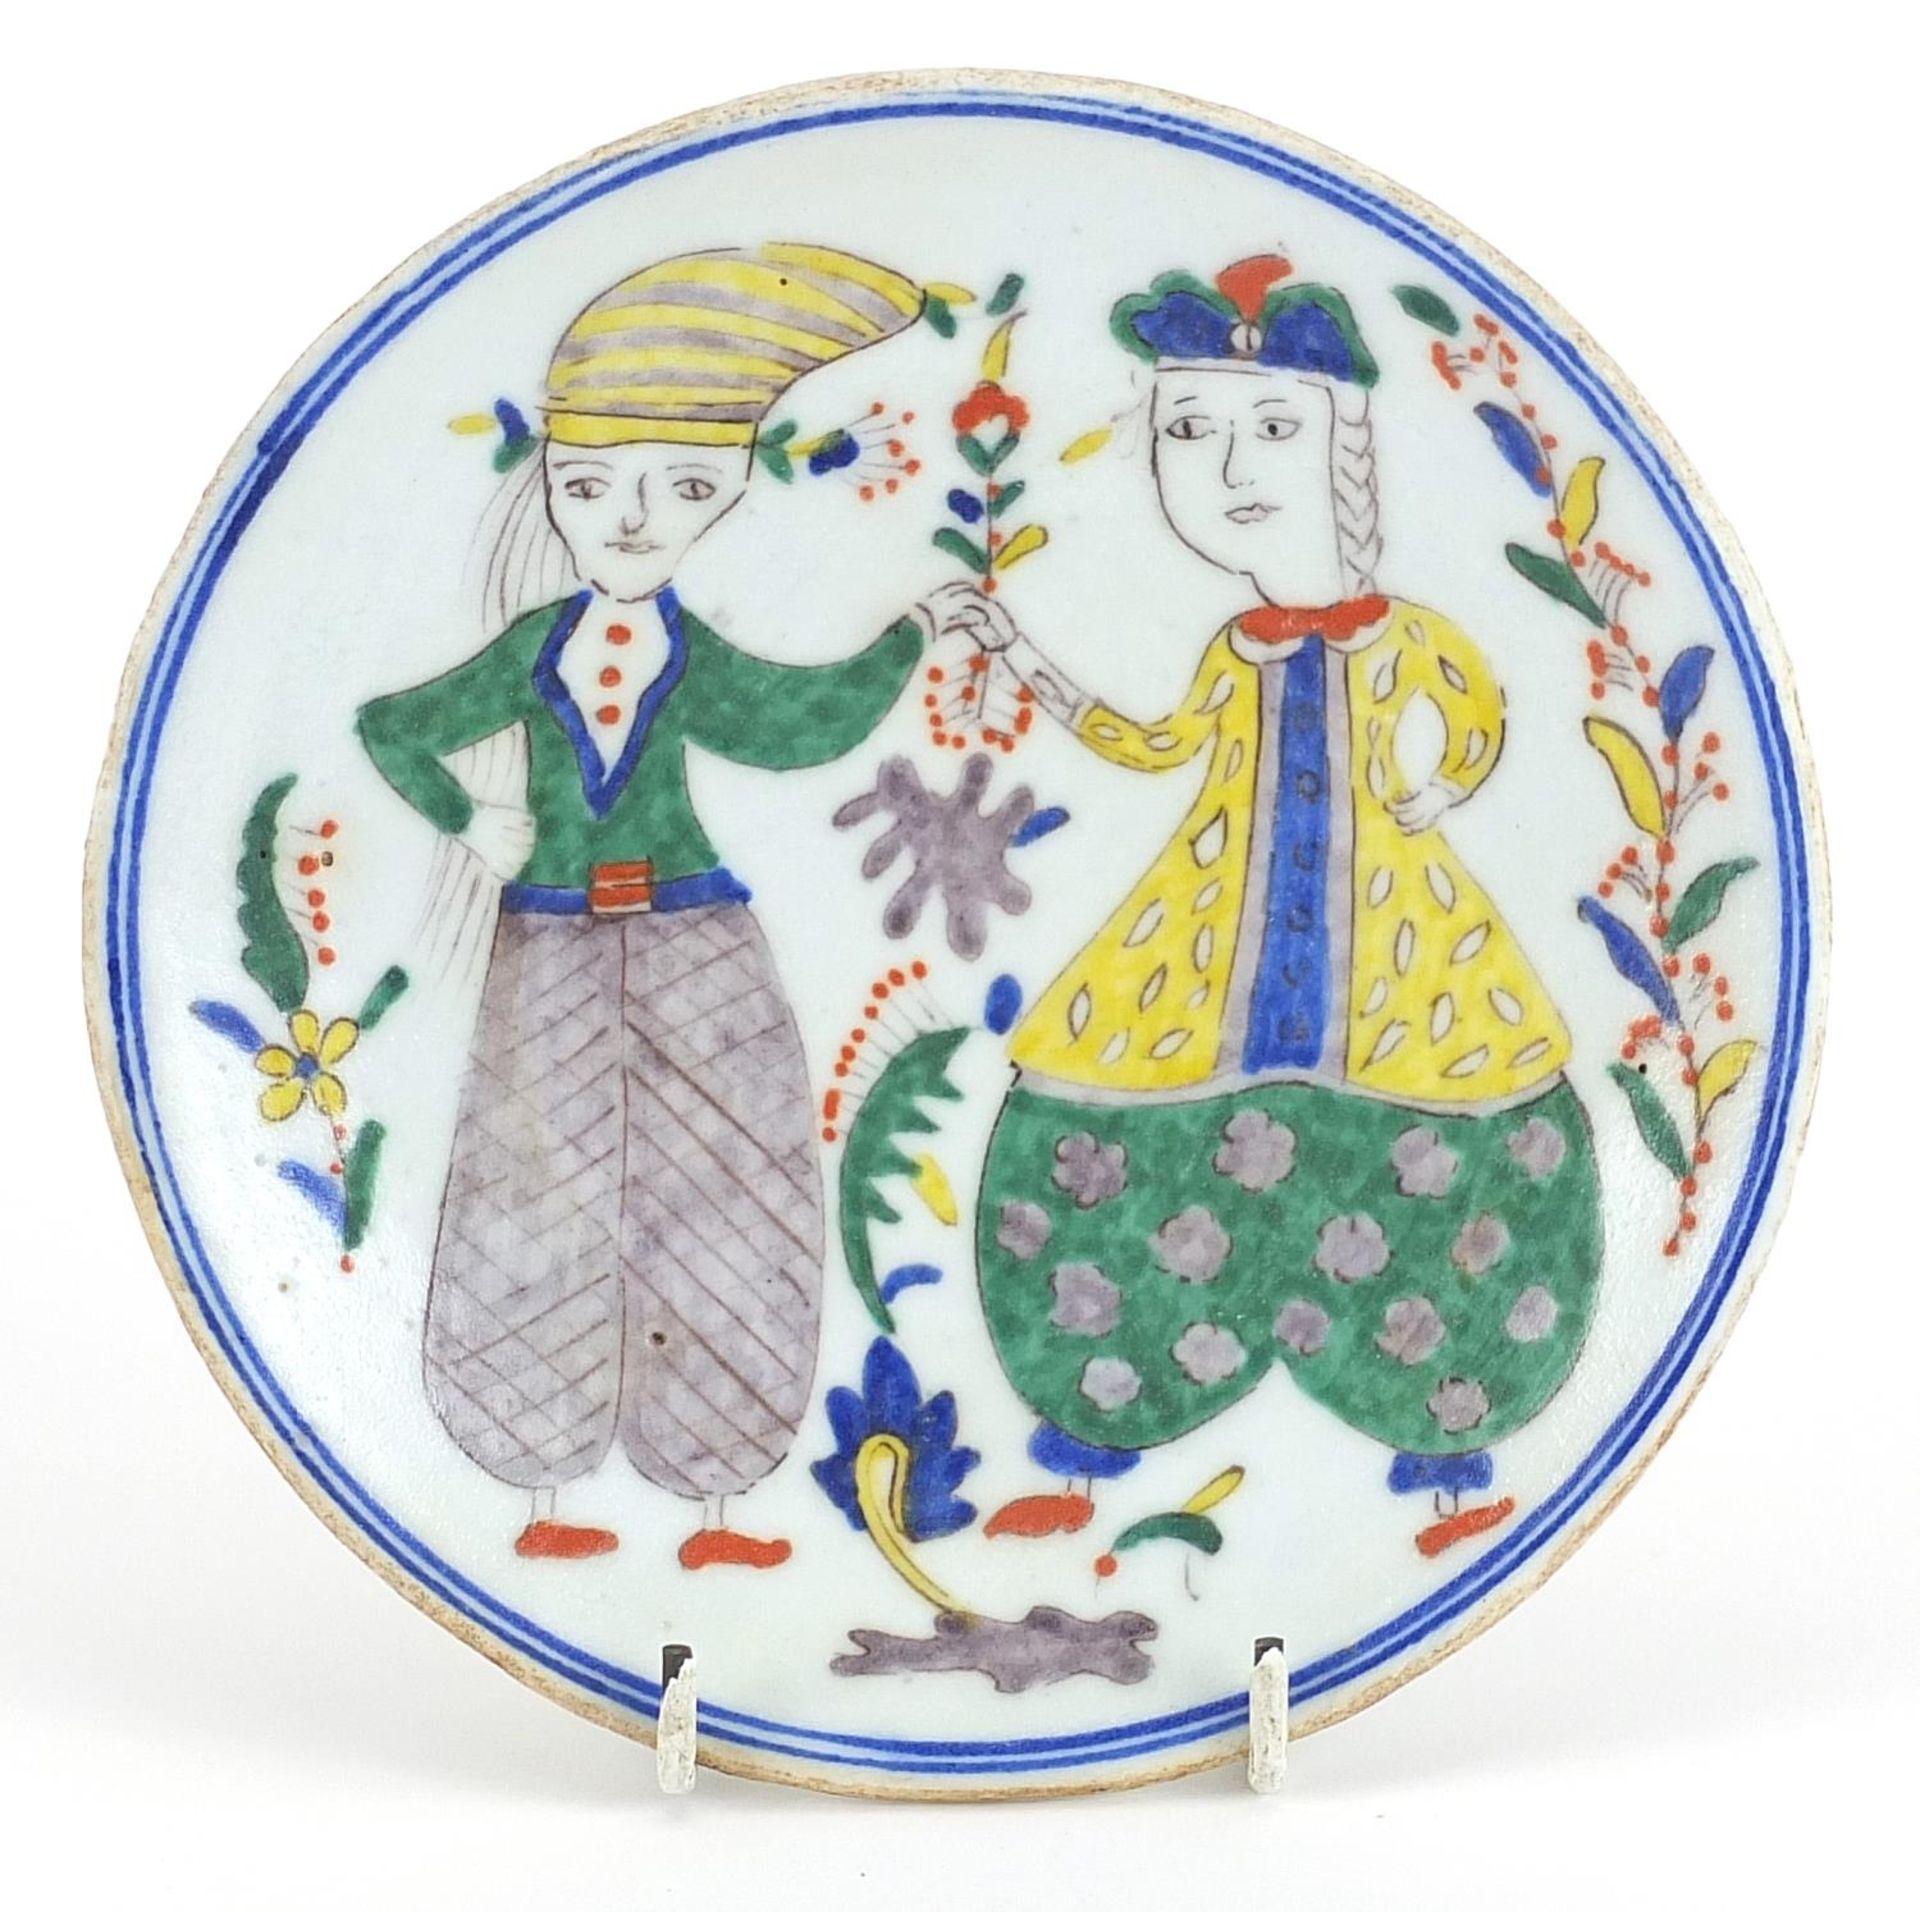 Turkish Kutahya pottery plate hand painted with two figures, 15.5cm in diameter